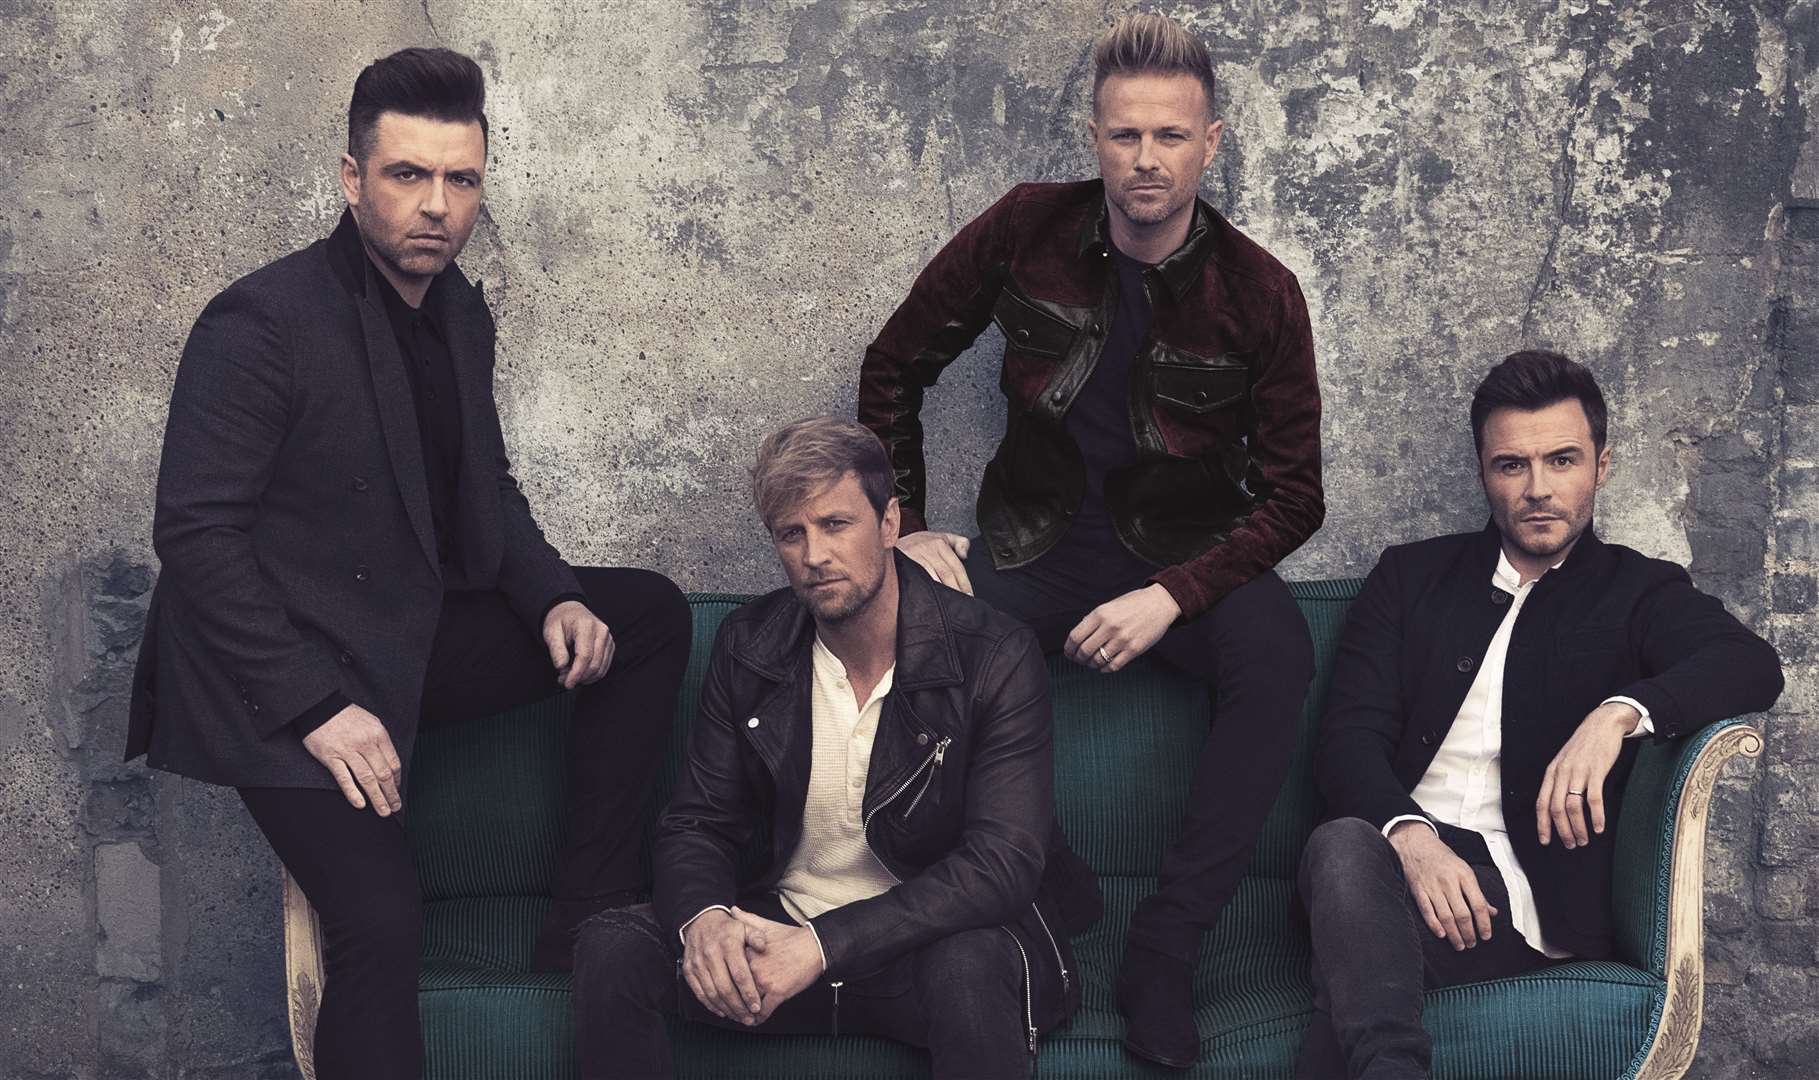 Westlife have sold more than 55 million records worldwide